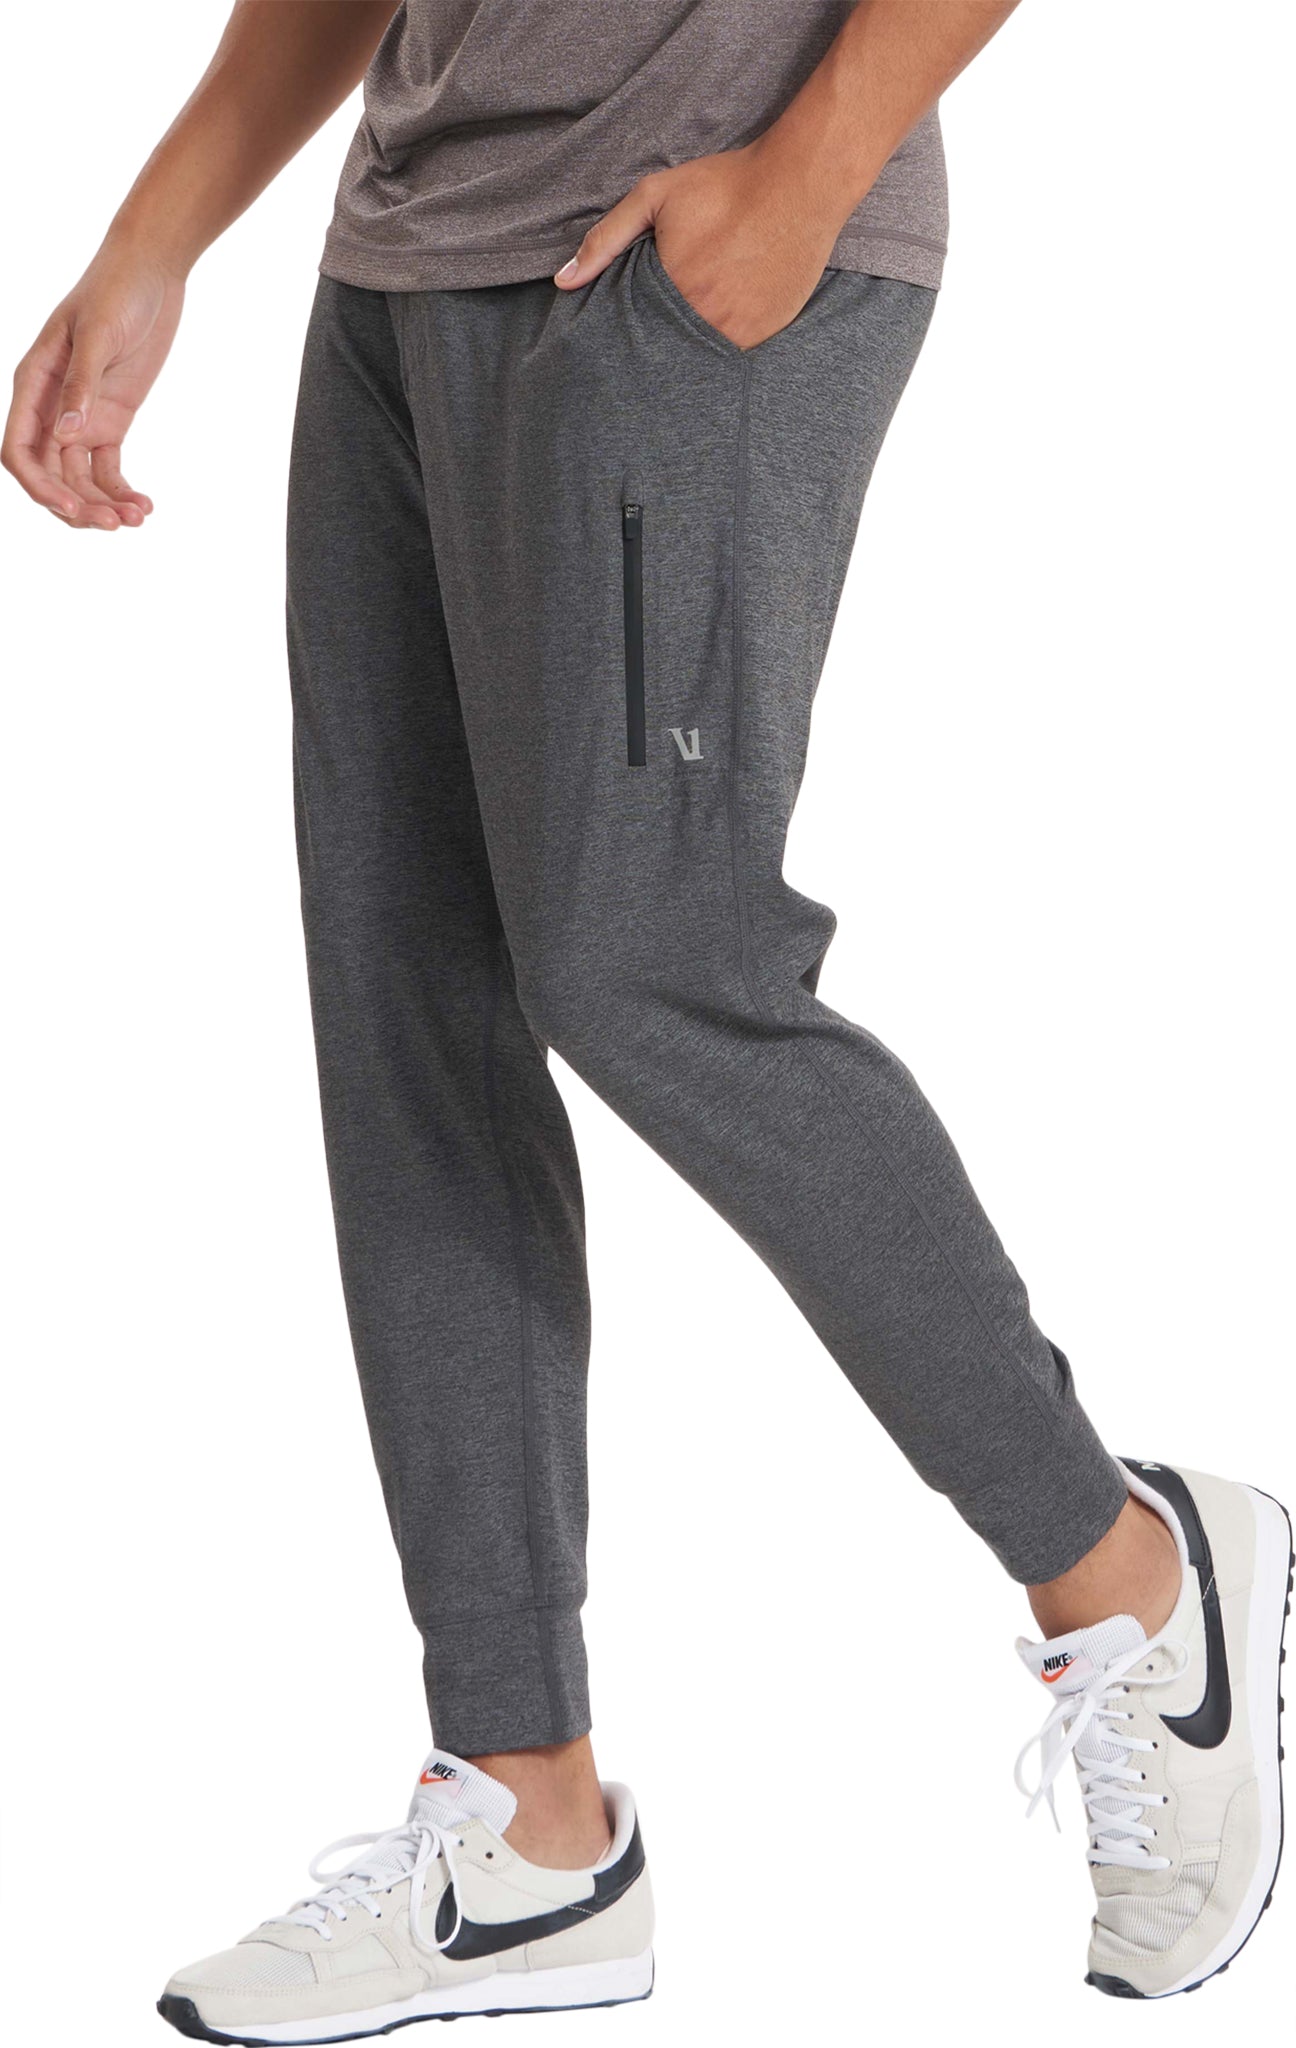 Vuori Joggers Review - wit & whimsy, Lifestyle Blog